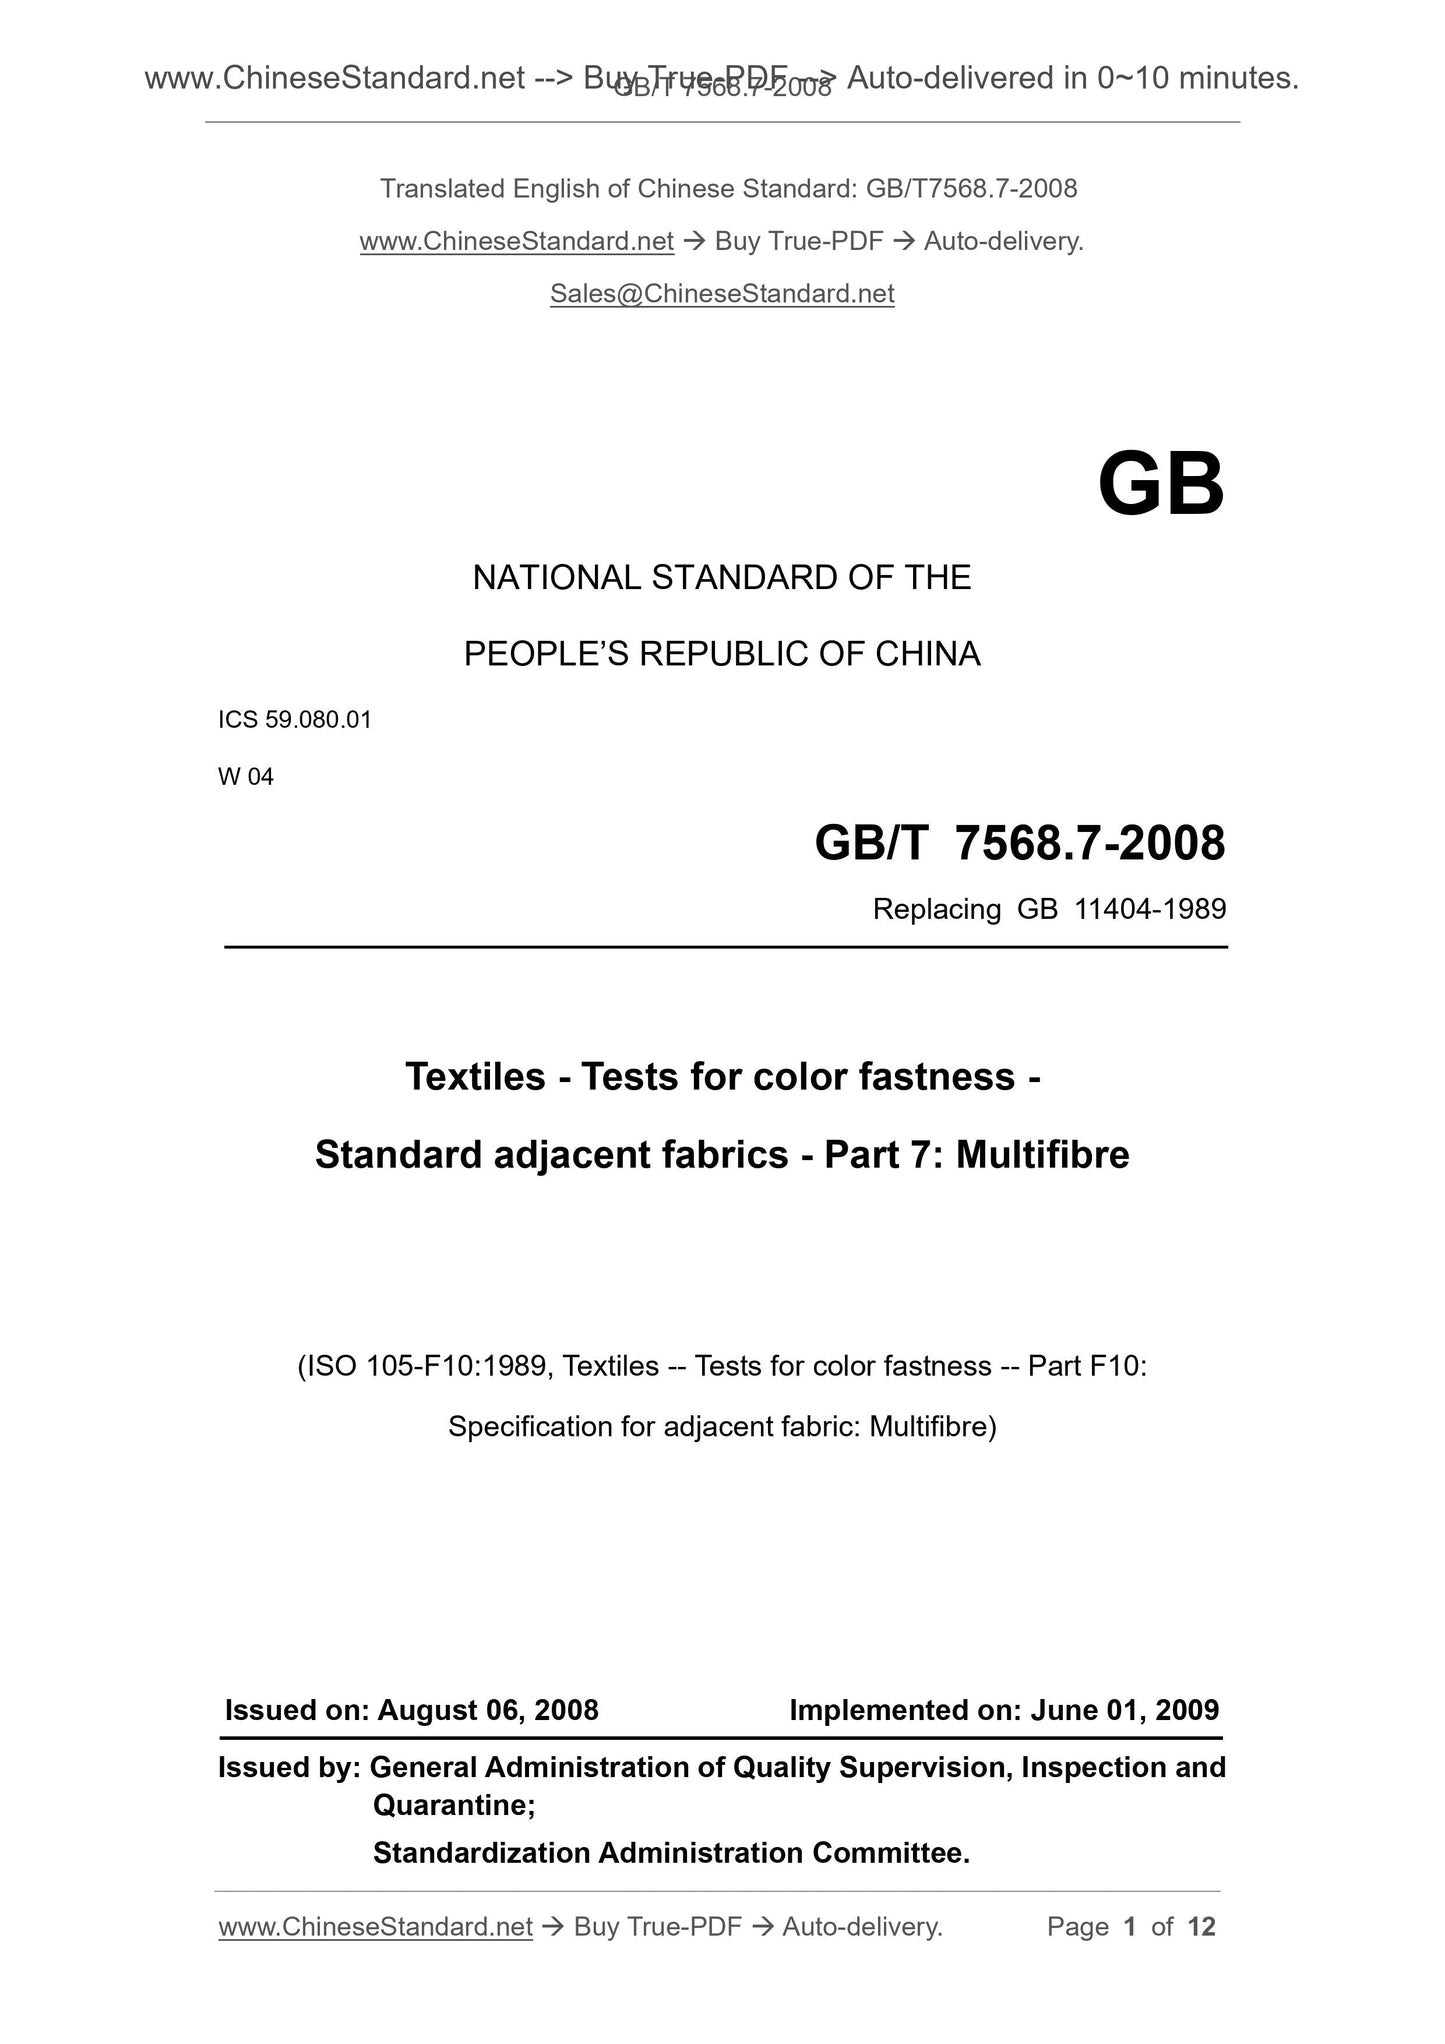 GB/T 7568.7-2008 Page 1